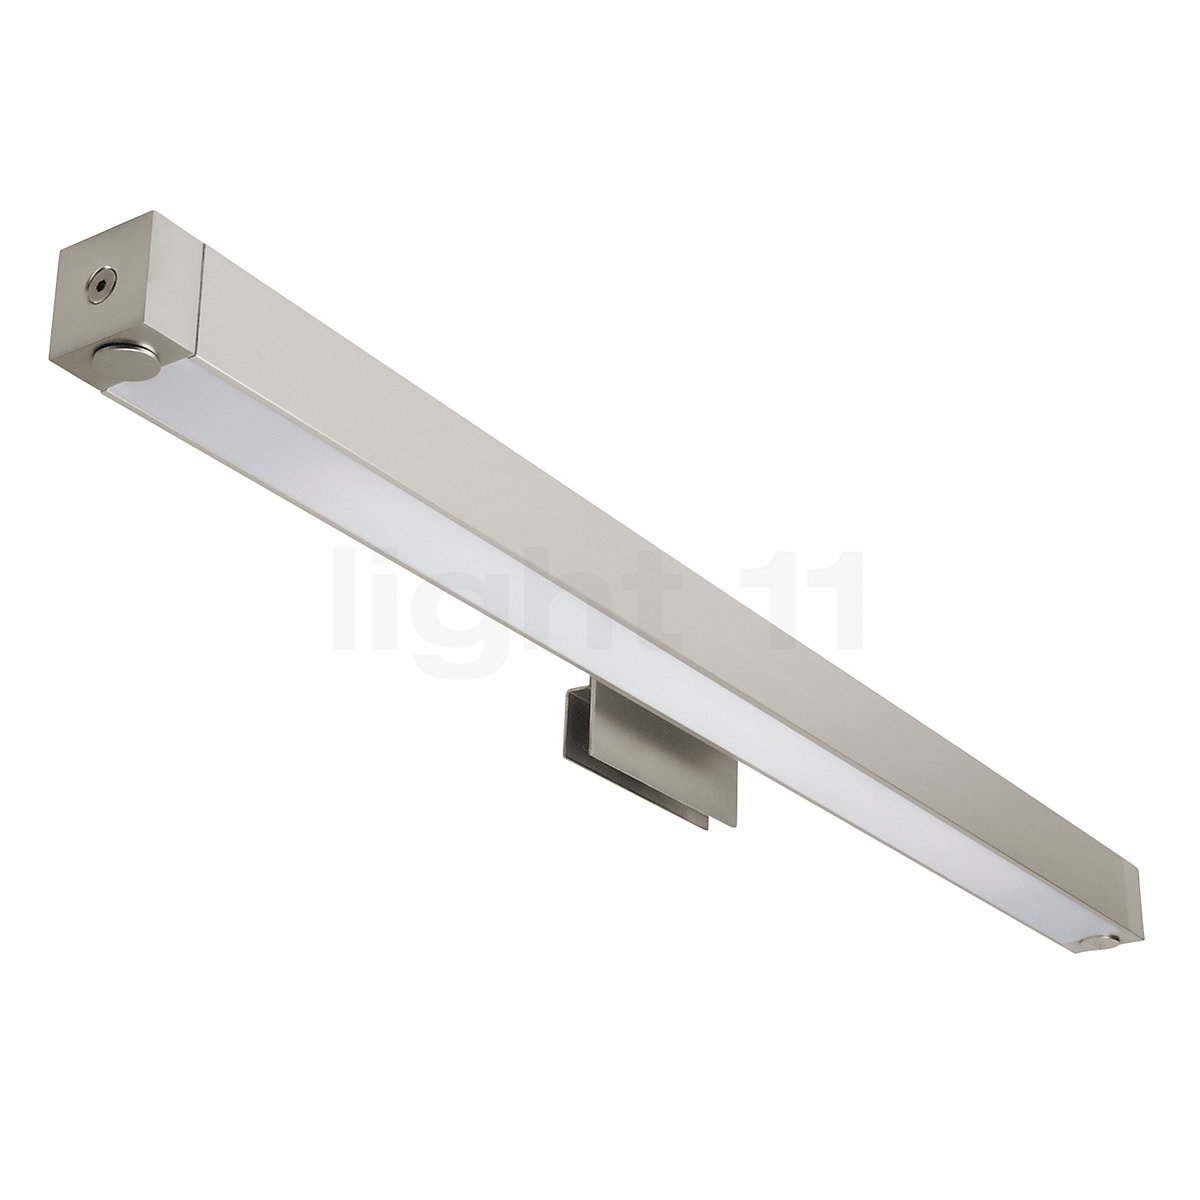 Buy Top Only Choice Mirror cm Clip-On Light LED at